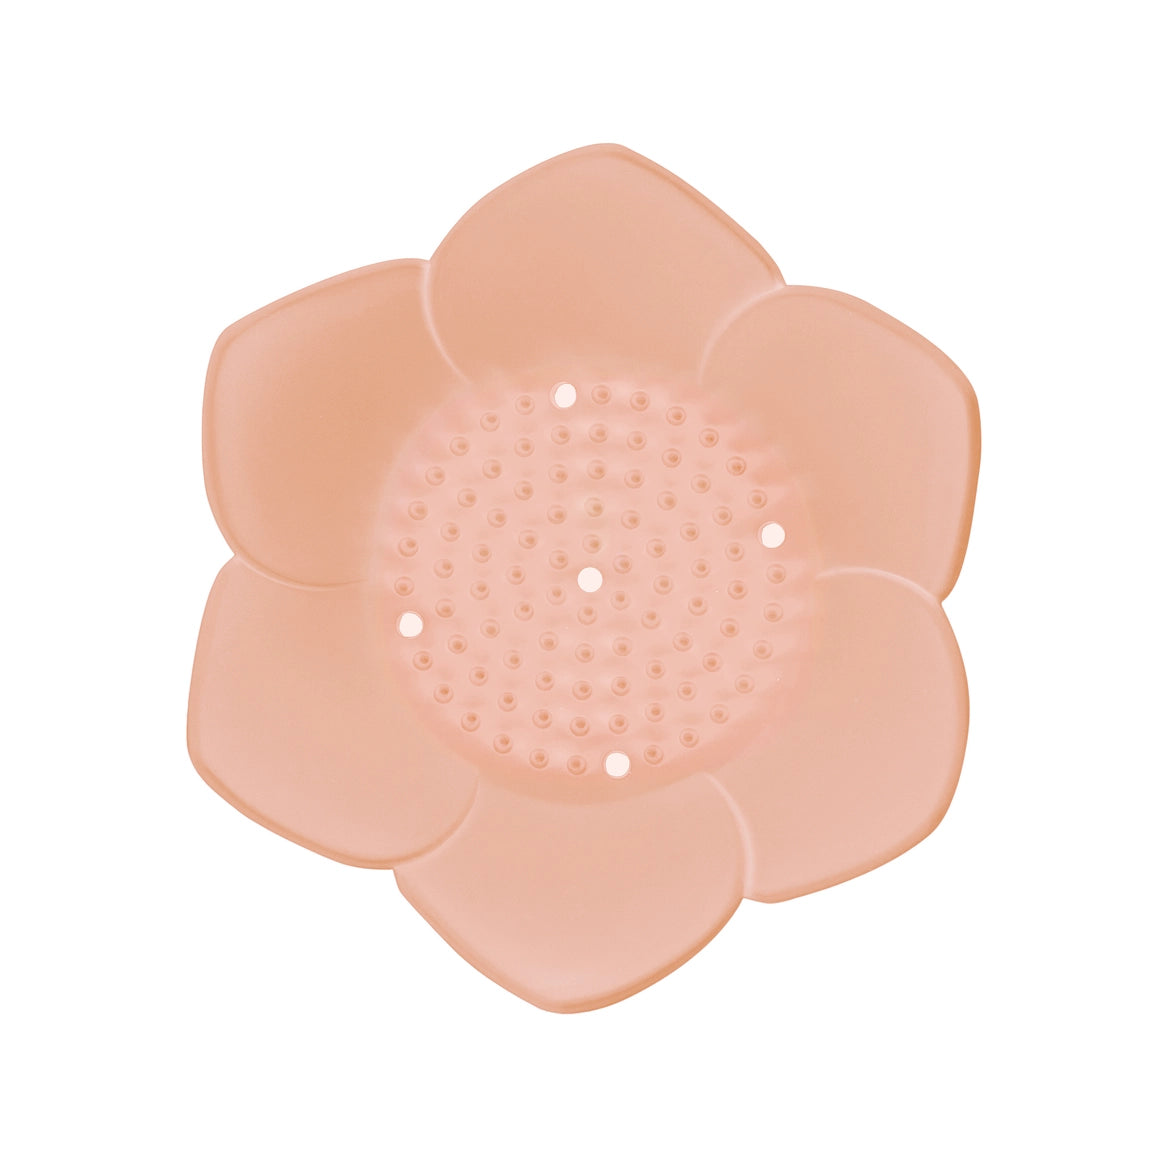 Naples Soap Co.: Lotus Soap Dish Sunkissed